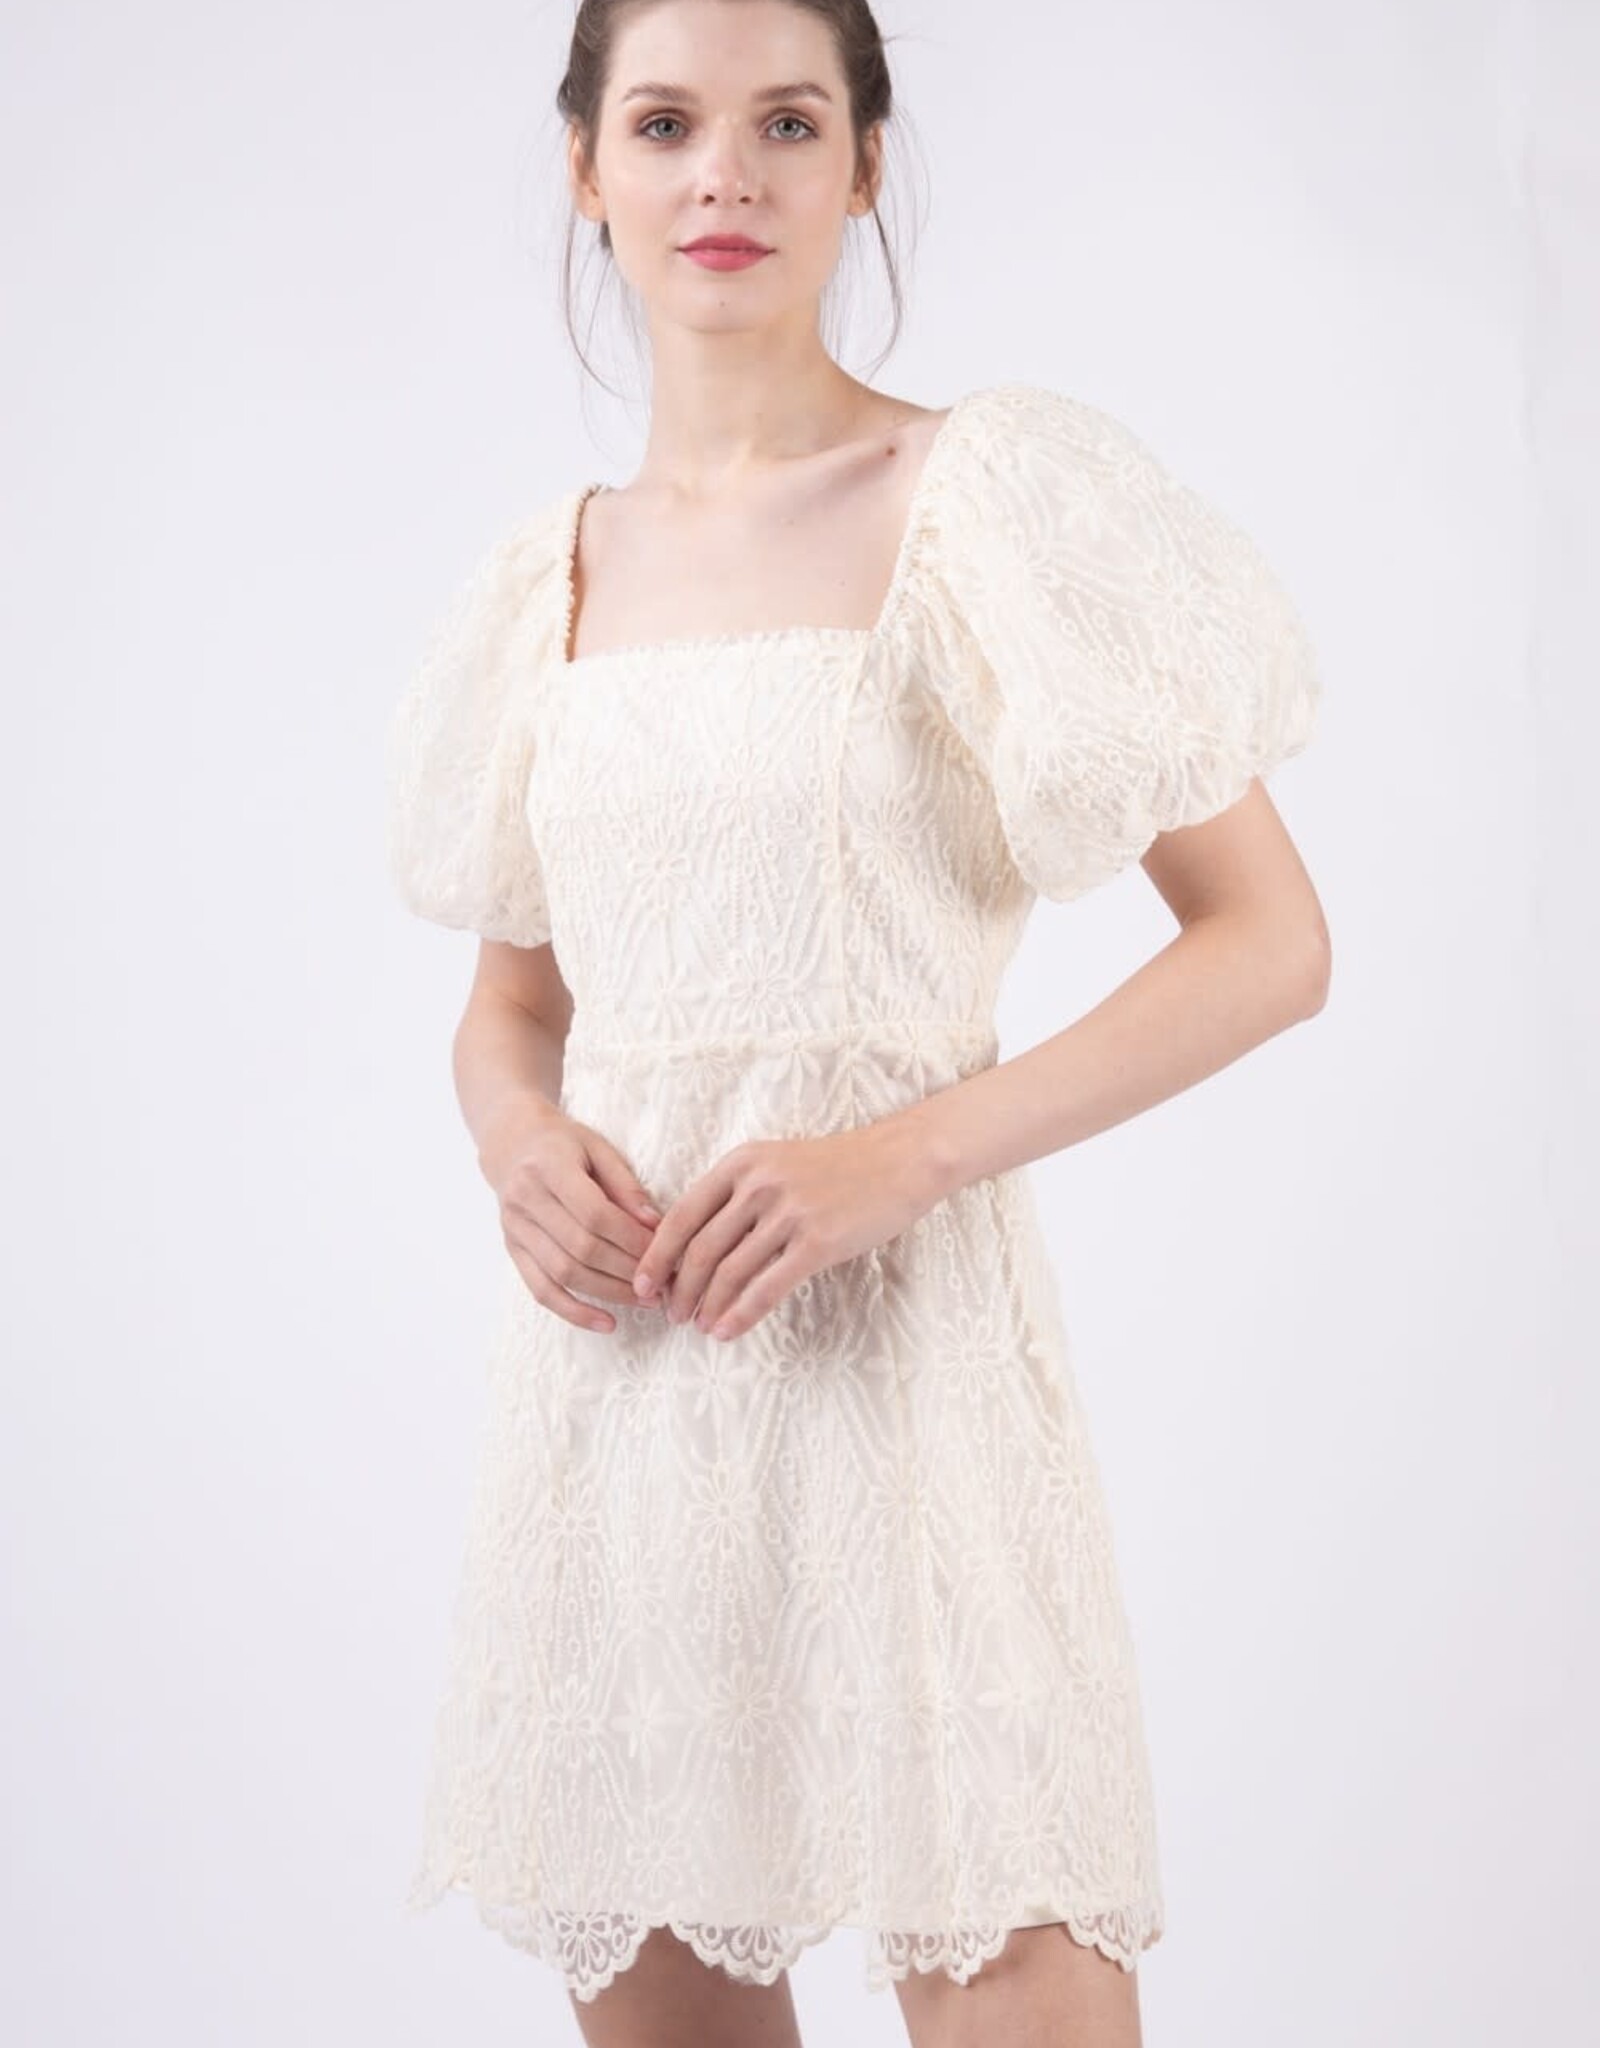 Paige Dress in White Lace